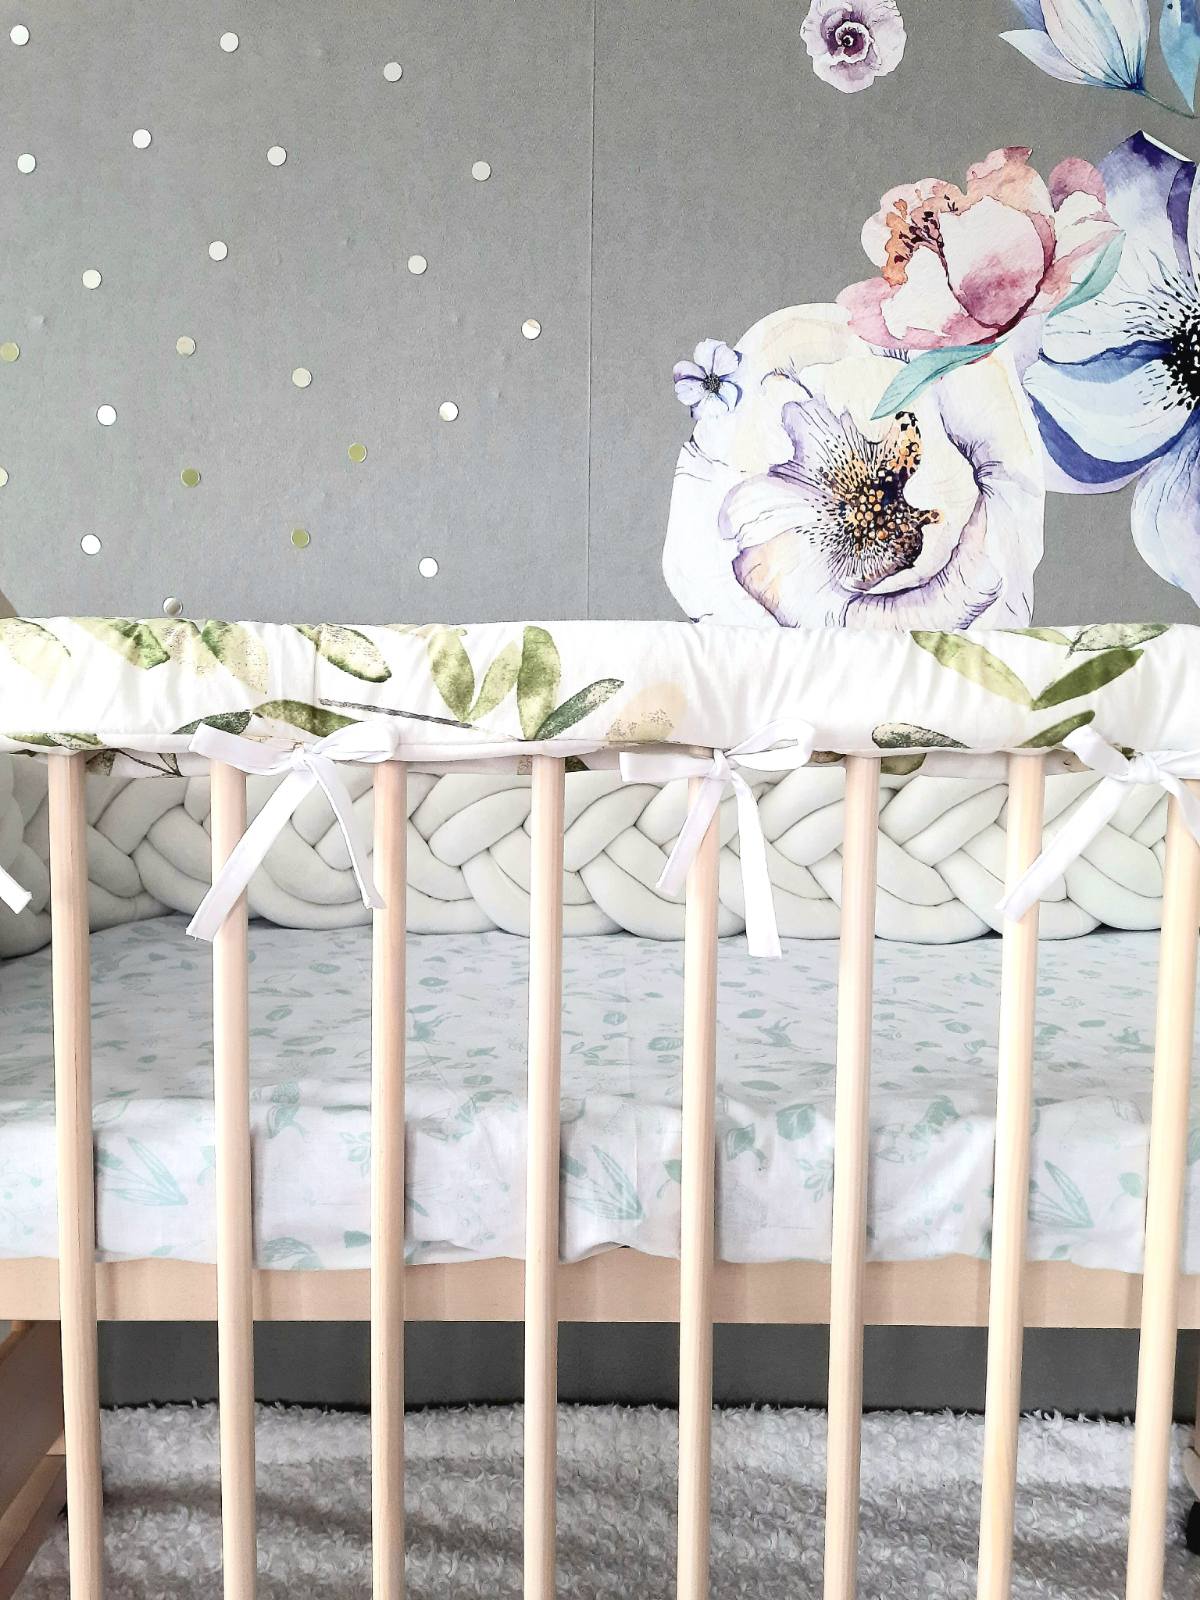 Cotton Rail Cover: Protect Your Baby's Crib in Style - Green Leaf